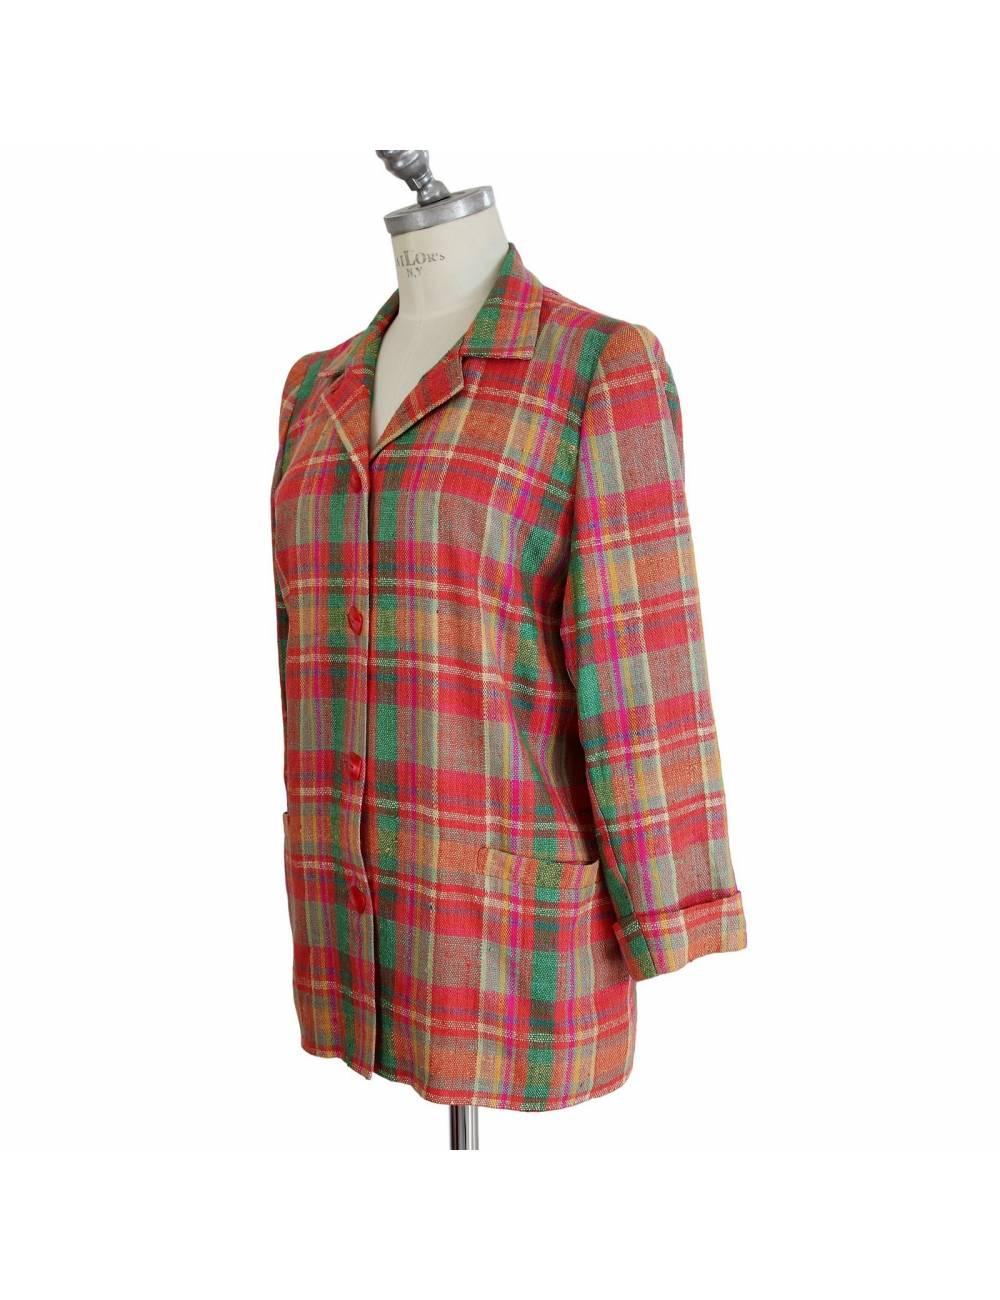 Valentino Atelier vintage cotton check jacket 1980s, pink. Red buttons, two front pockets. Sleeves with cuff.

Size 44 IT 10 US 12 UK

Shoulder: 44 cm
Bust/Chest: 52 cm
Sleeve: 50 cm
Length: 74 cm